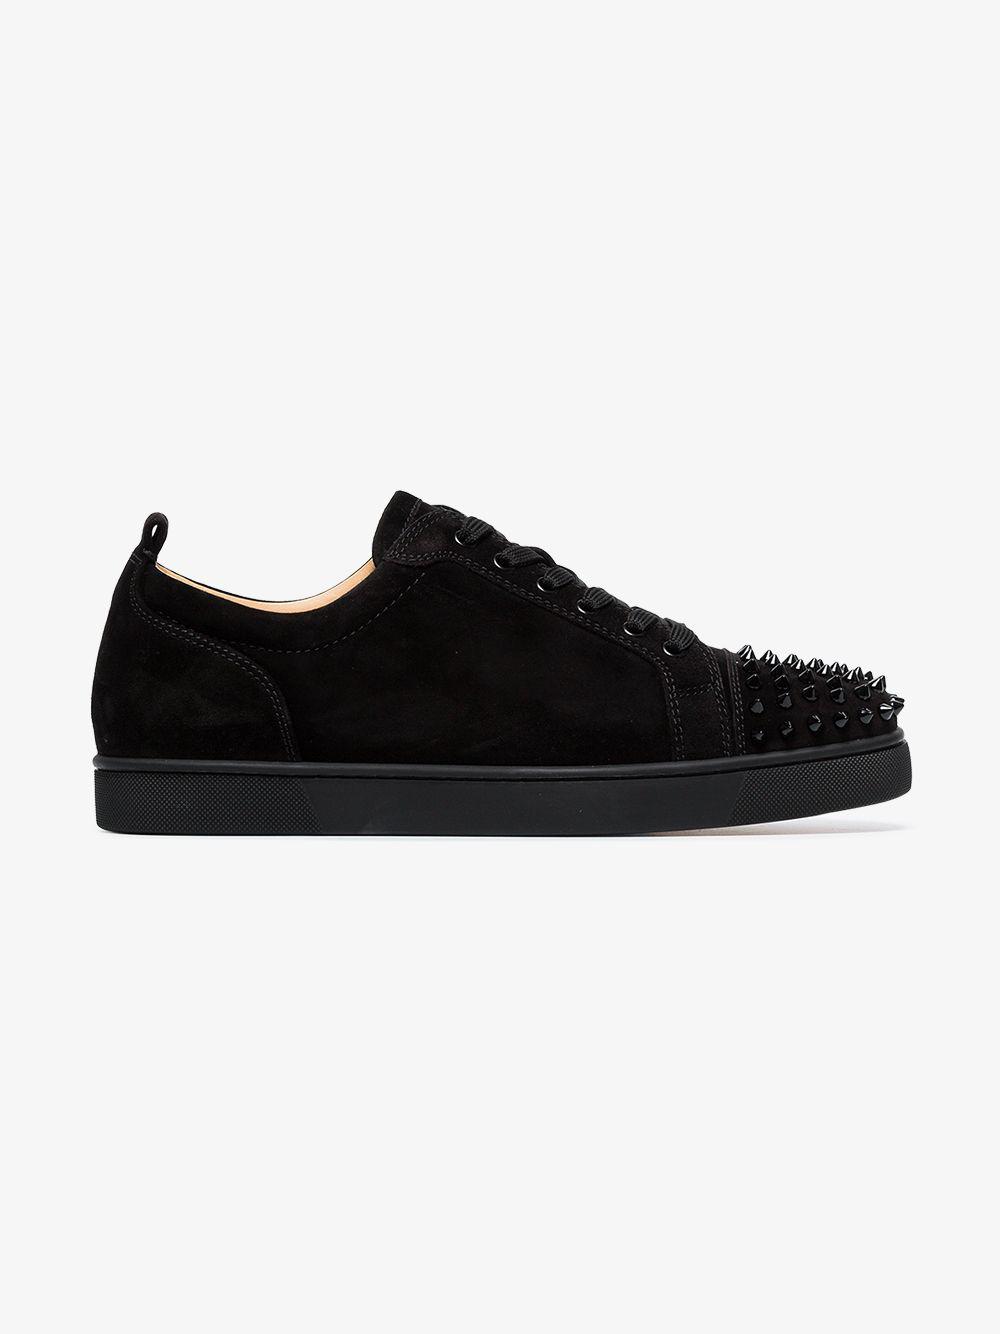 Louis junior spike leather low trainers Christian Louboutin Black size 11.5  US in Leather - 35706287